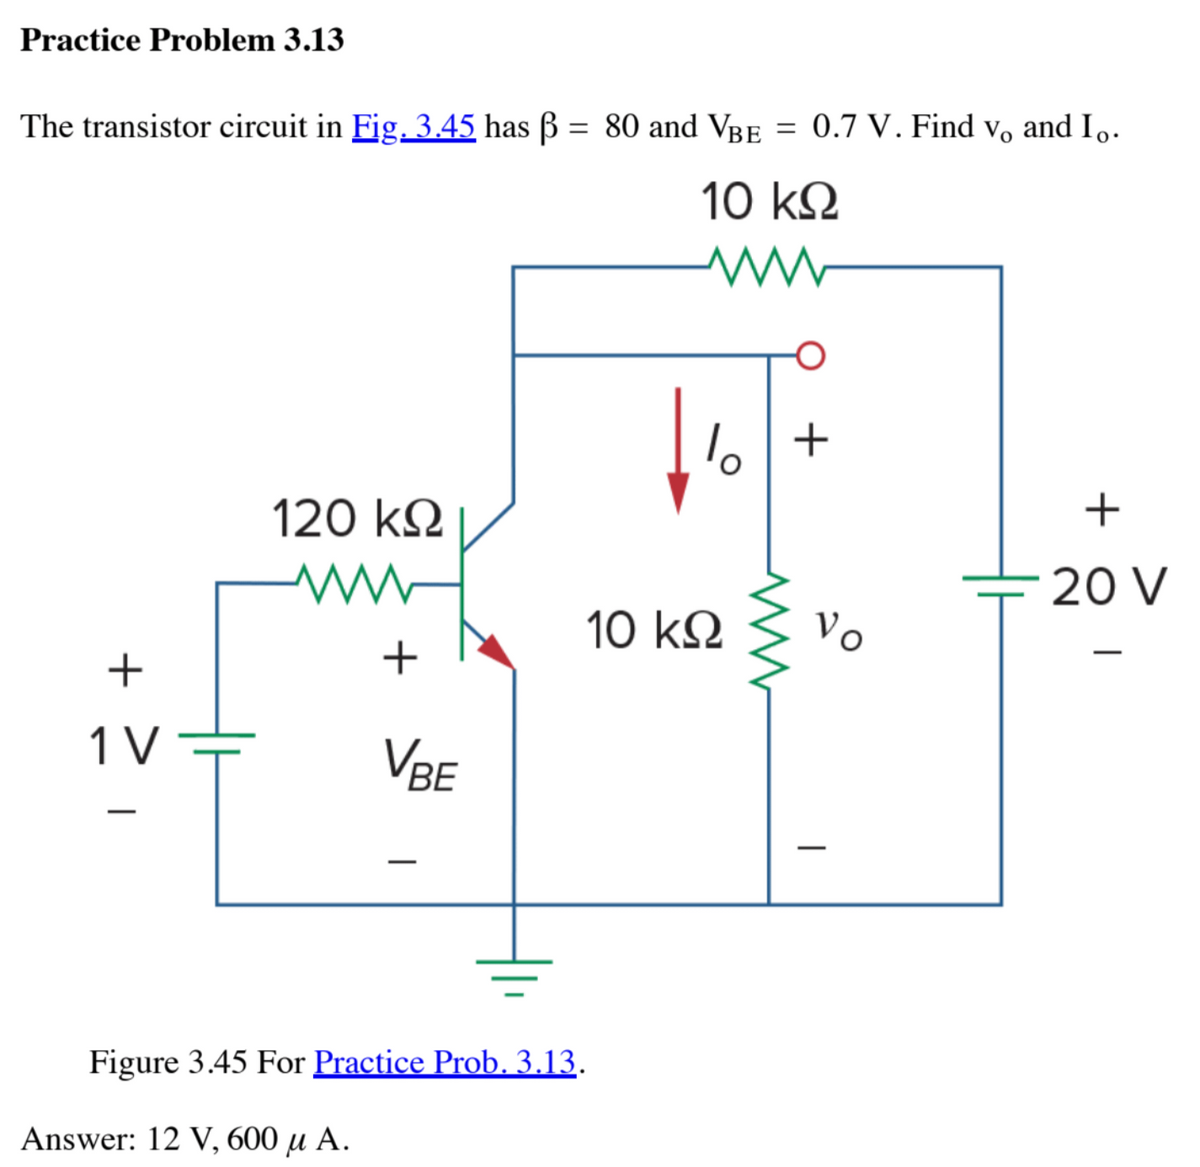 Practice Problem 3.13
The transistor circuit in Fig. 3.45 has ß = 80 and VBE = 0.7 V. Find v。 and I。.
10 ΚΩ
www
+
1 V
120 ΚΩ
+
Answer: 12 V, 600 µ A.
VBE
Figure 3.45 For Practice Prob. 3.13.
1
6 +
10 ΚΩ
Vo
|
+
20 V